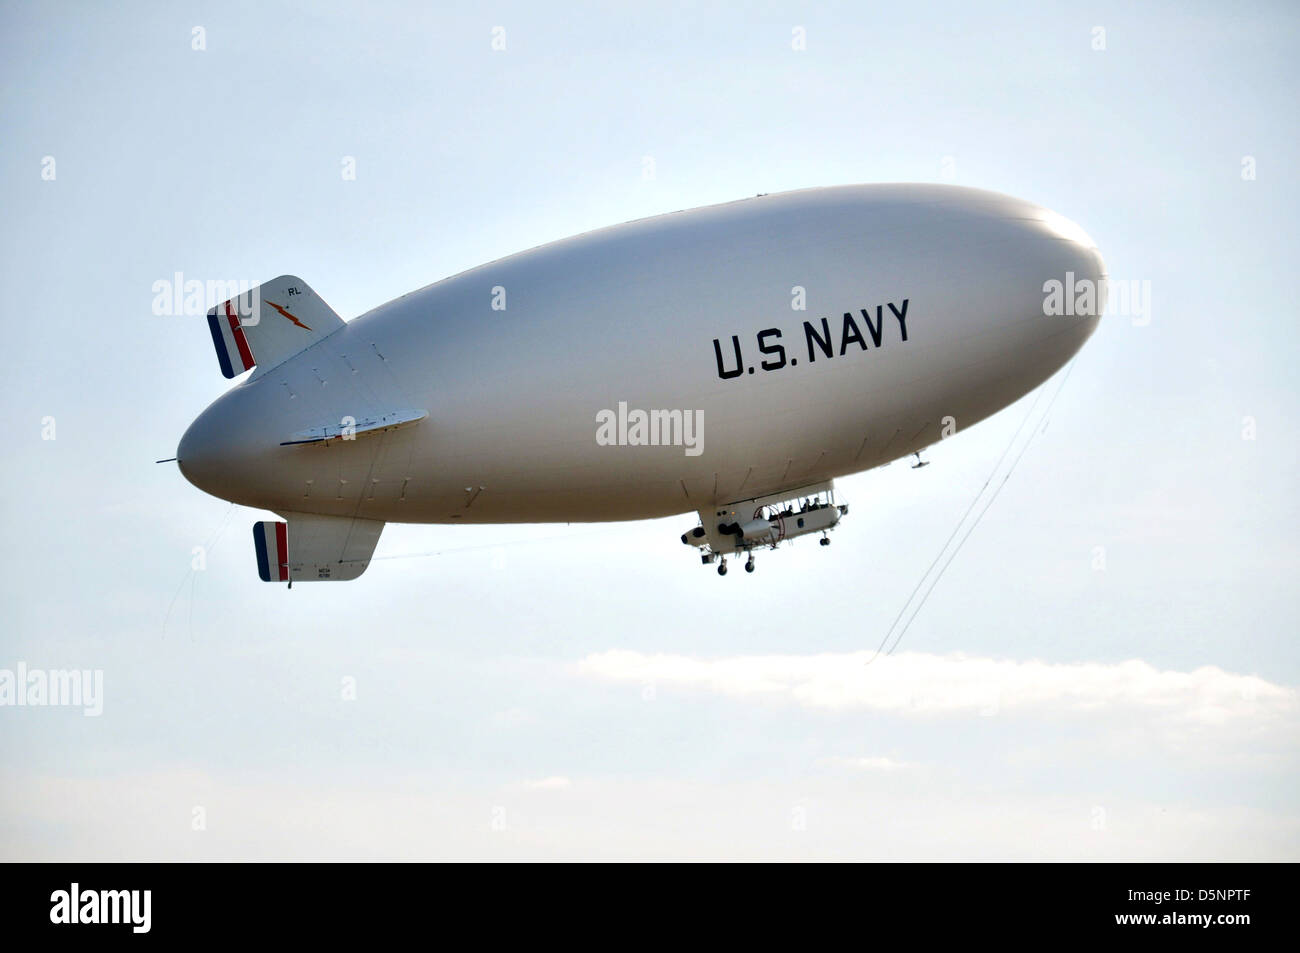 The US Navy’s only manned airship the MZ-3A lifts off at Fernandina Beach Municipal Airport April 3, 2013 in Fernandina, Florida. The airship is a test platform for surveillance cameras, radars and other sensors. Stock Photo